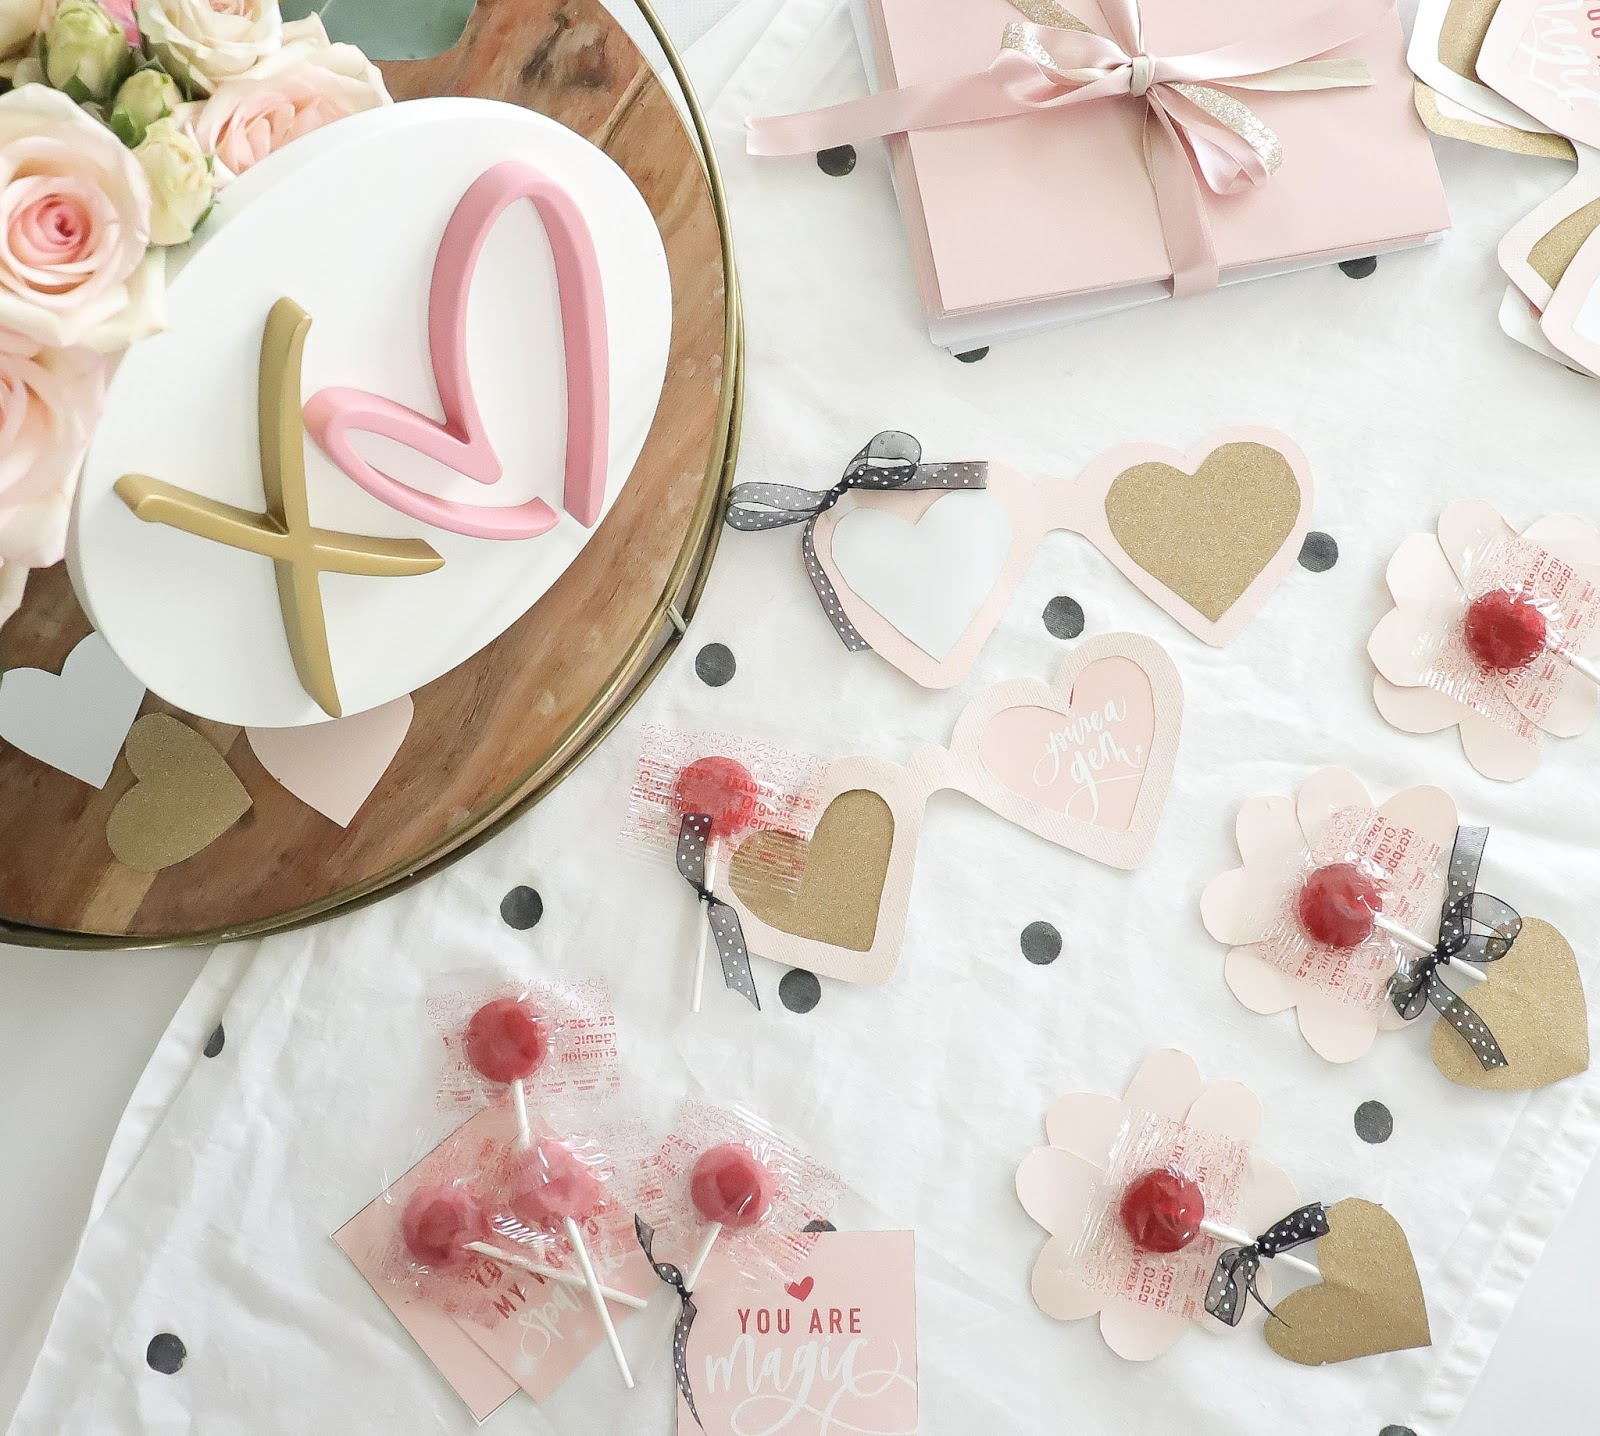 valentines day gifts and ideas celebrating 